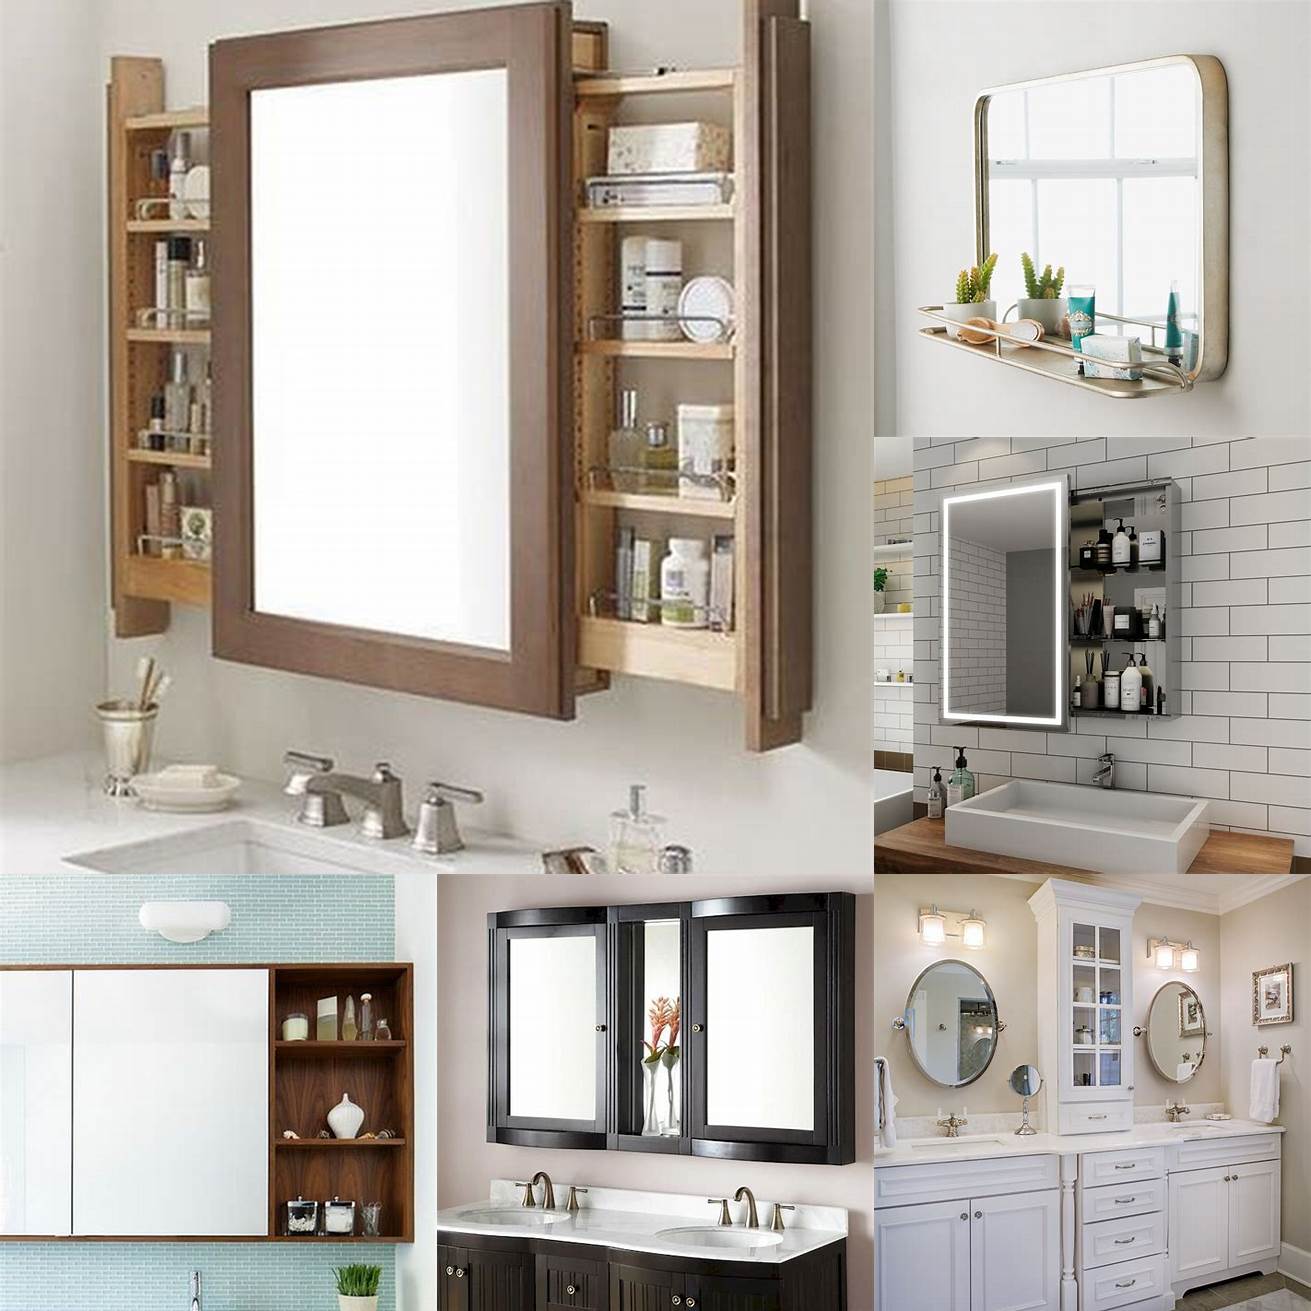 Storage mirrors provide functionality and organization for your bathroom